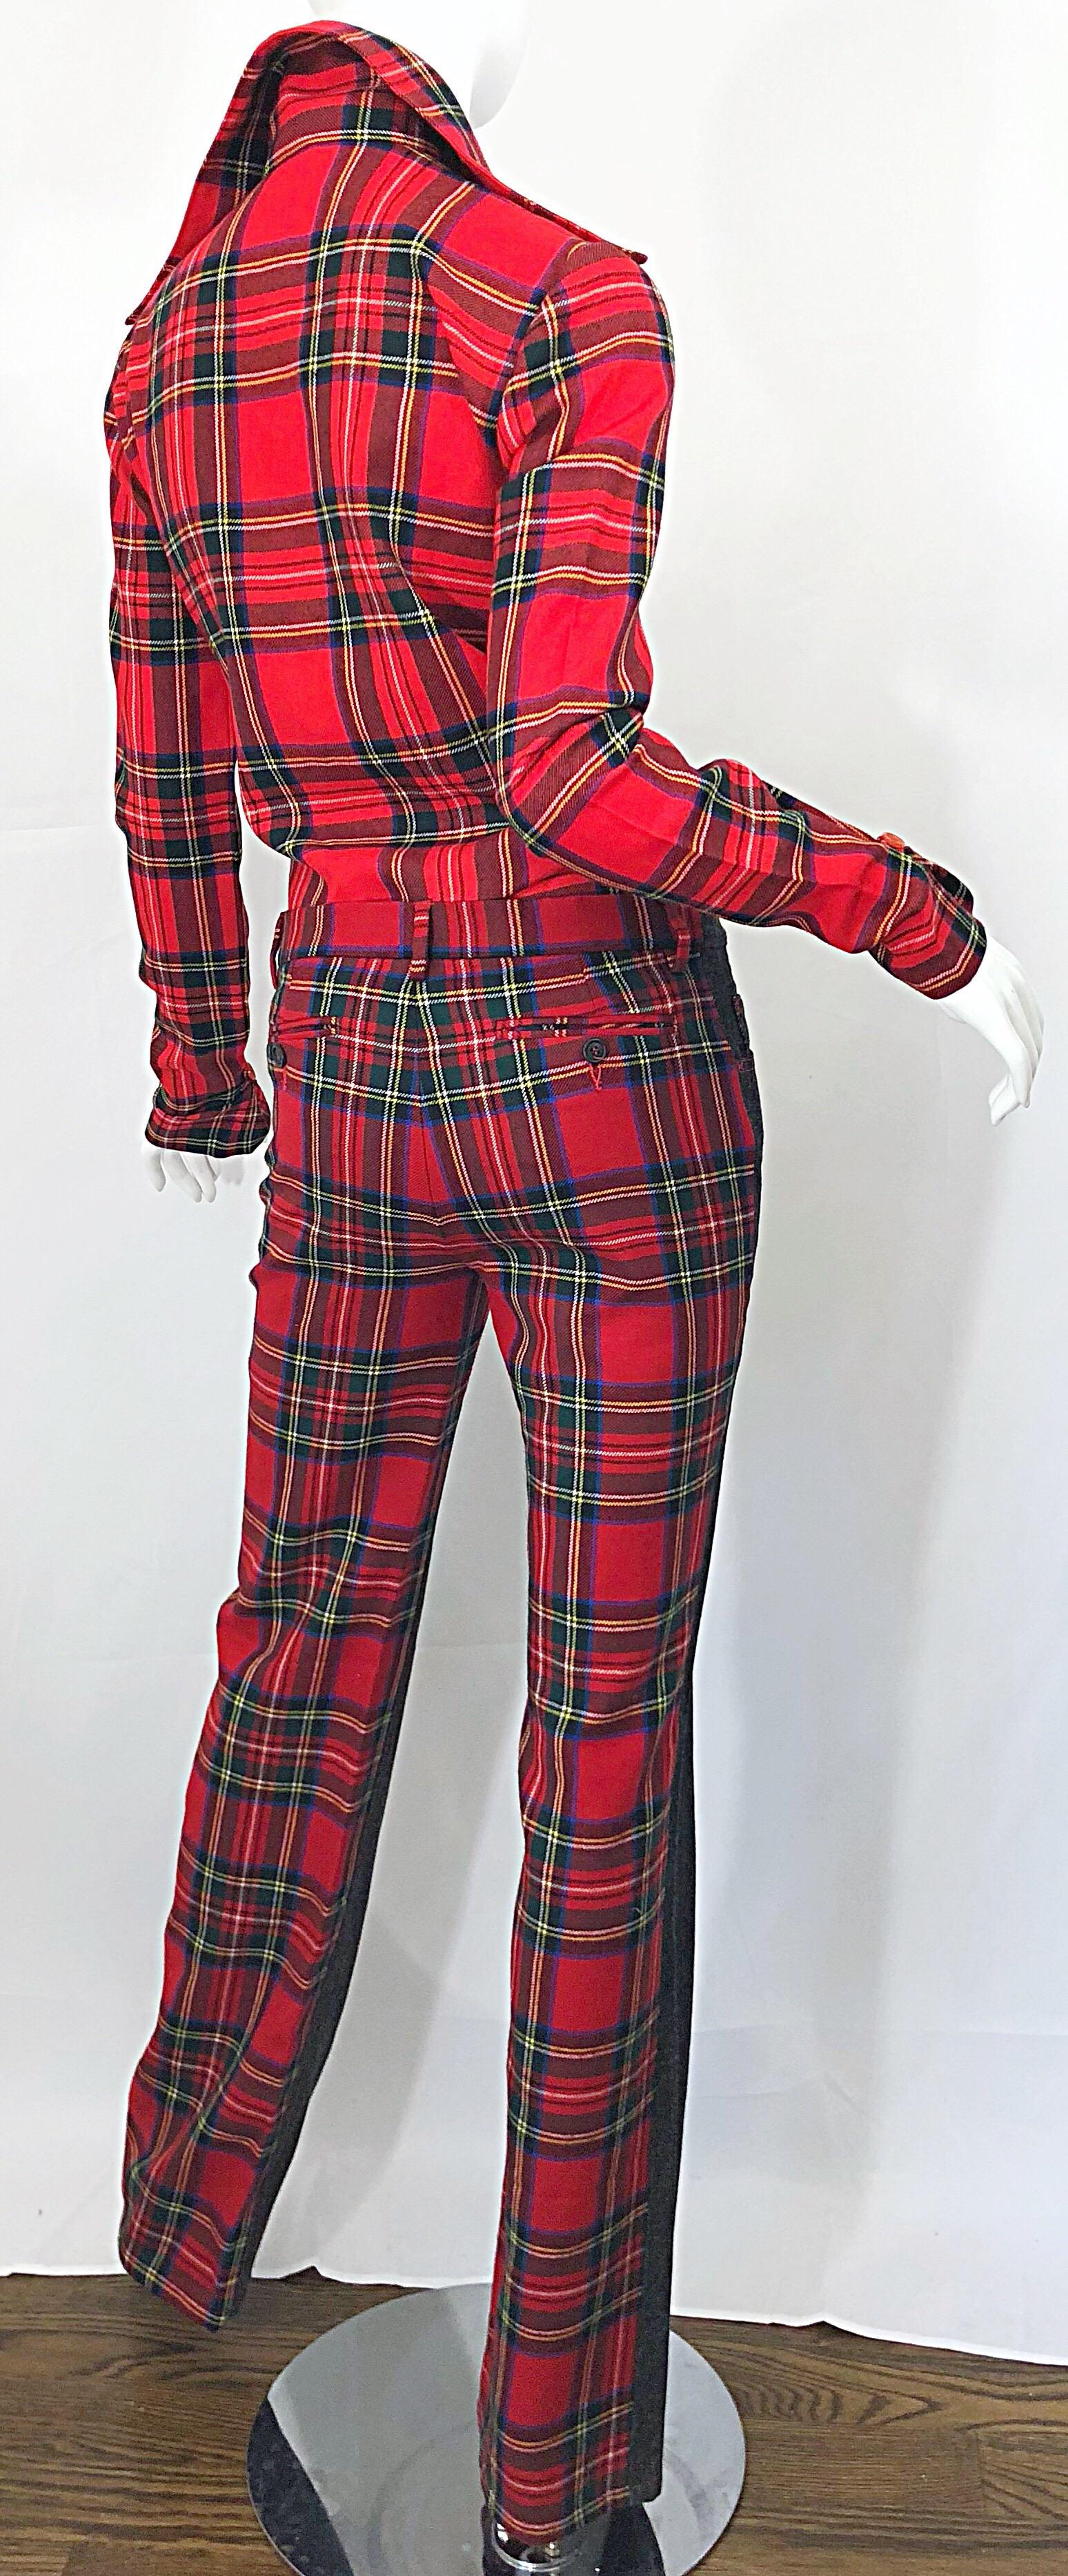 Rare 1990s Dolce & Gabbana Red Tartan Plaid Wool + Denim Flared Jeans and Shirt For Sale 3